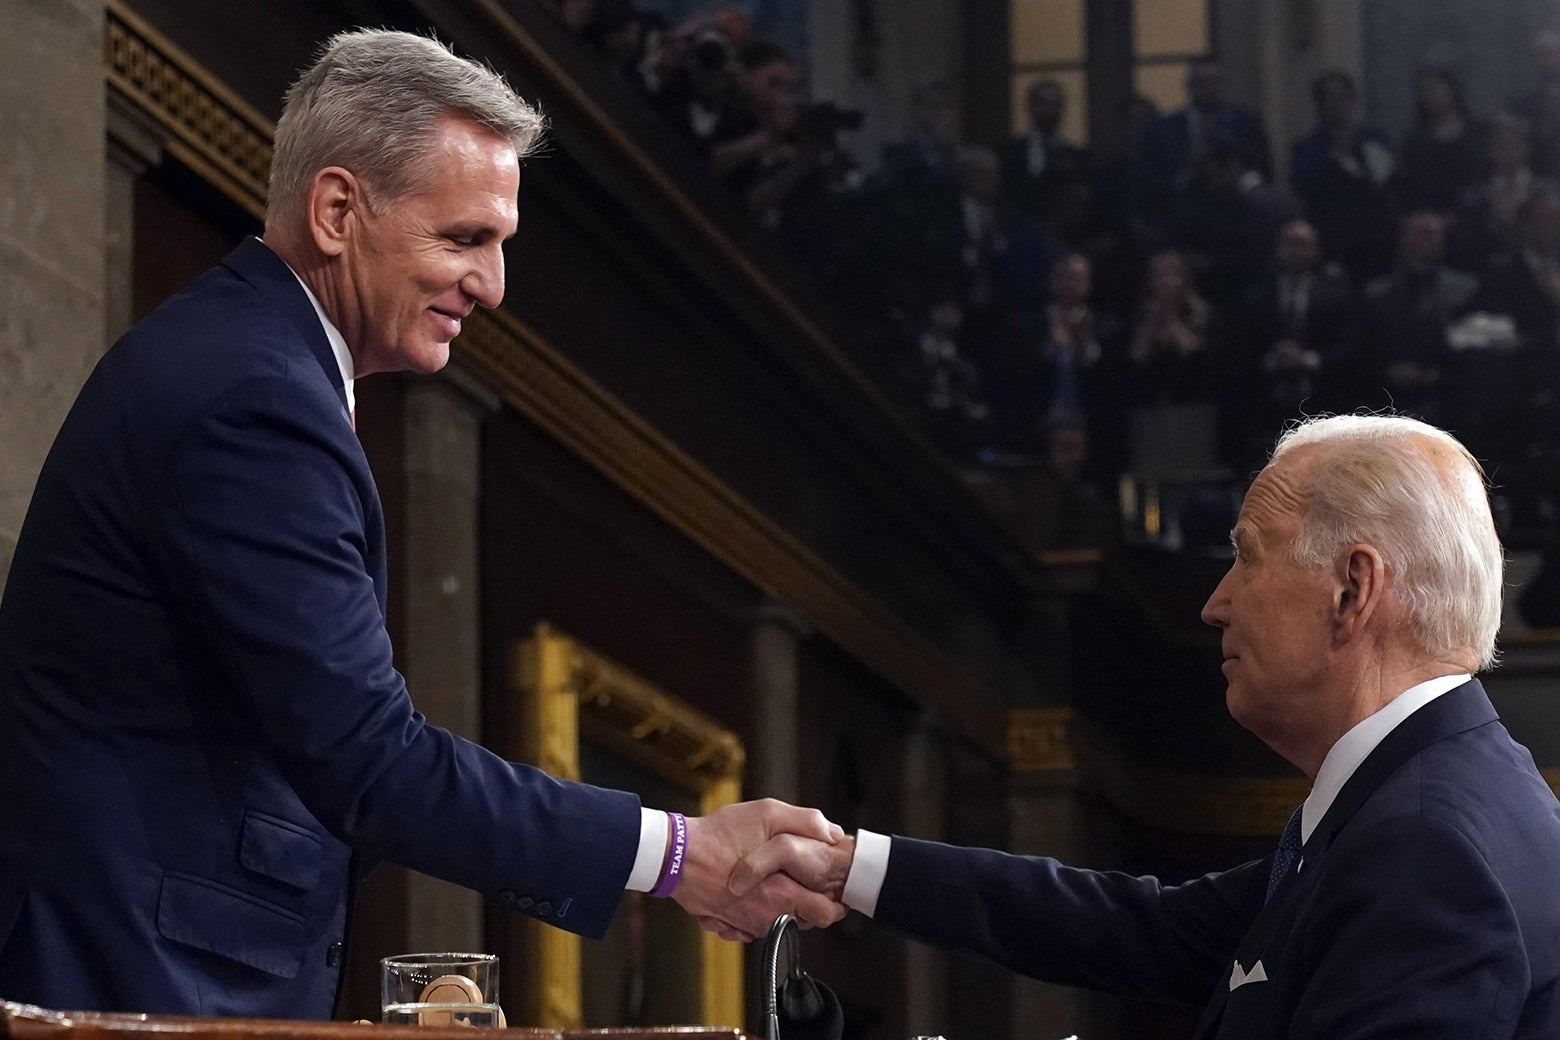 President Joe Biden reaches up to shake hands with House Speaker Kevin McCarthy.